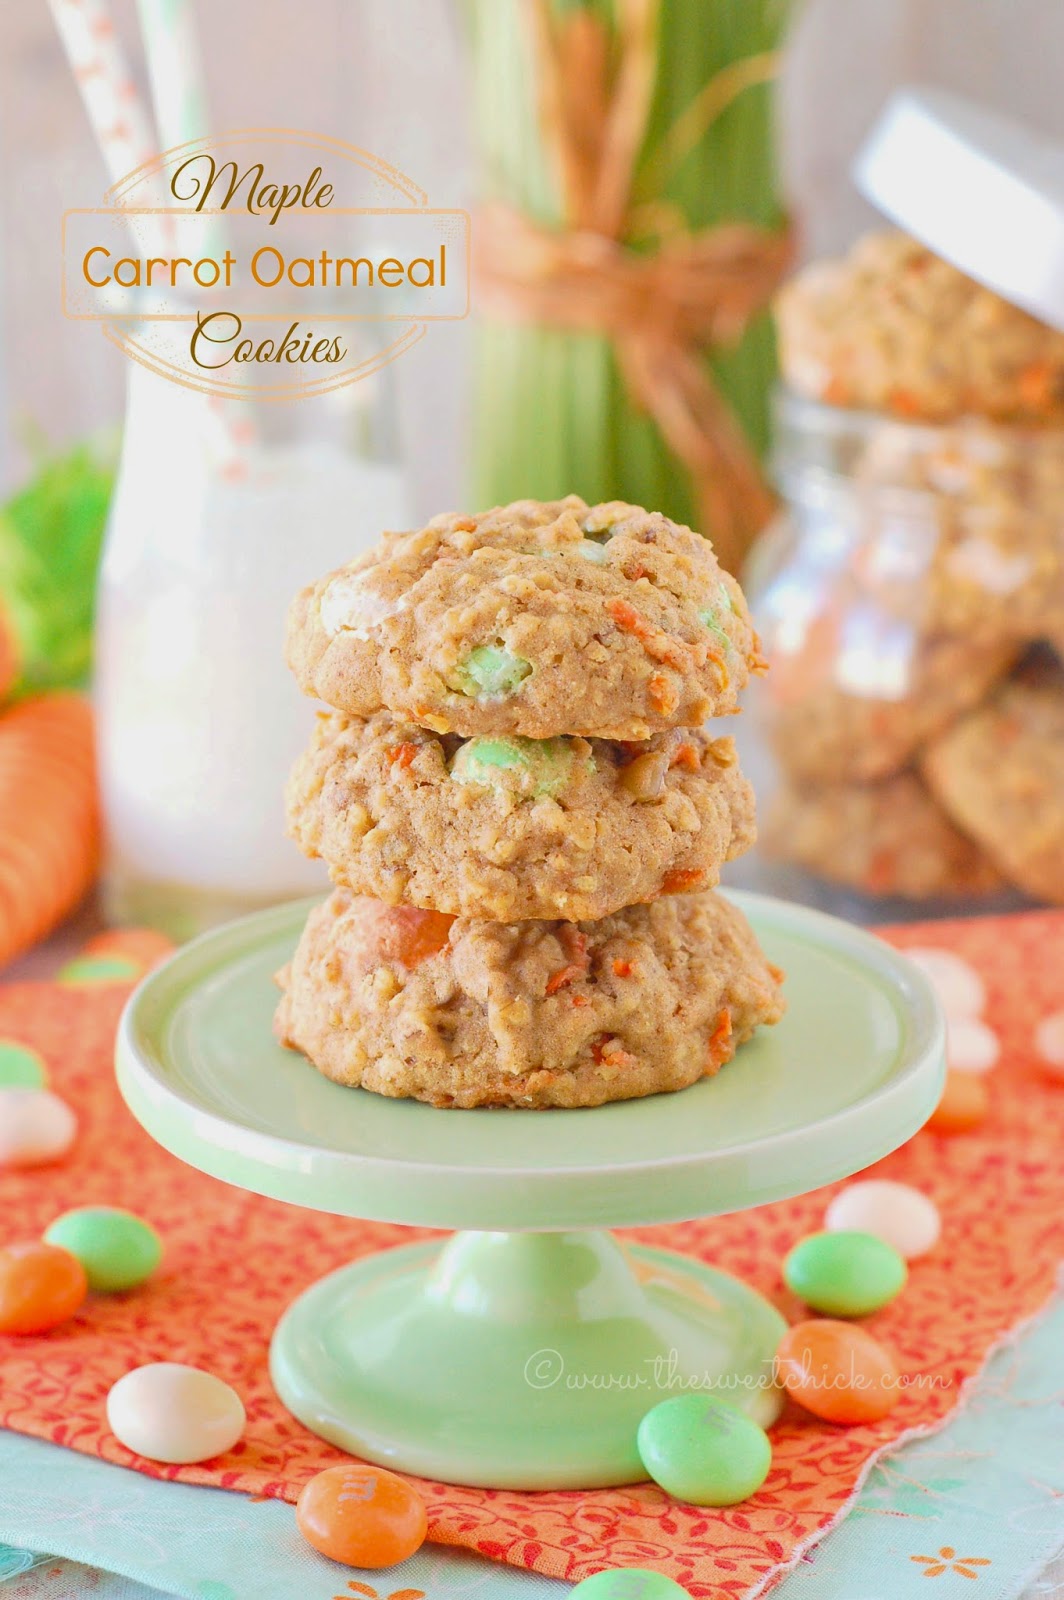 Maple Carrot Oatmeal Cookies by The Sweet Chick